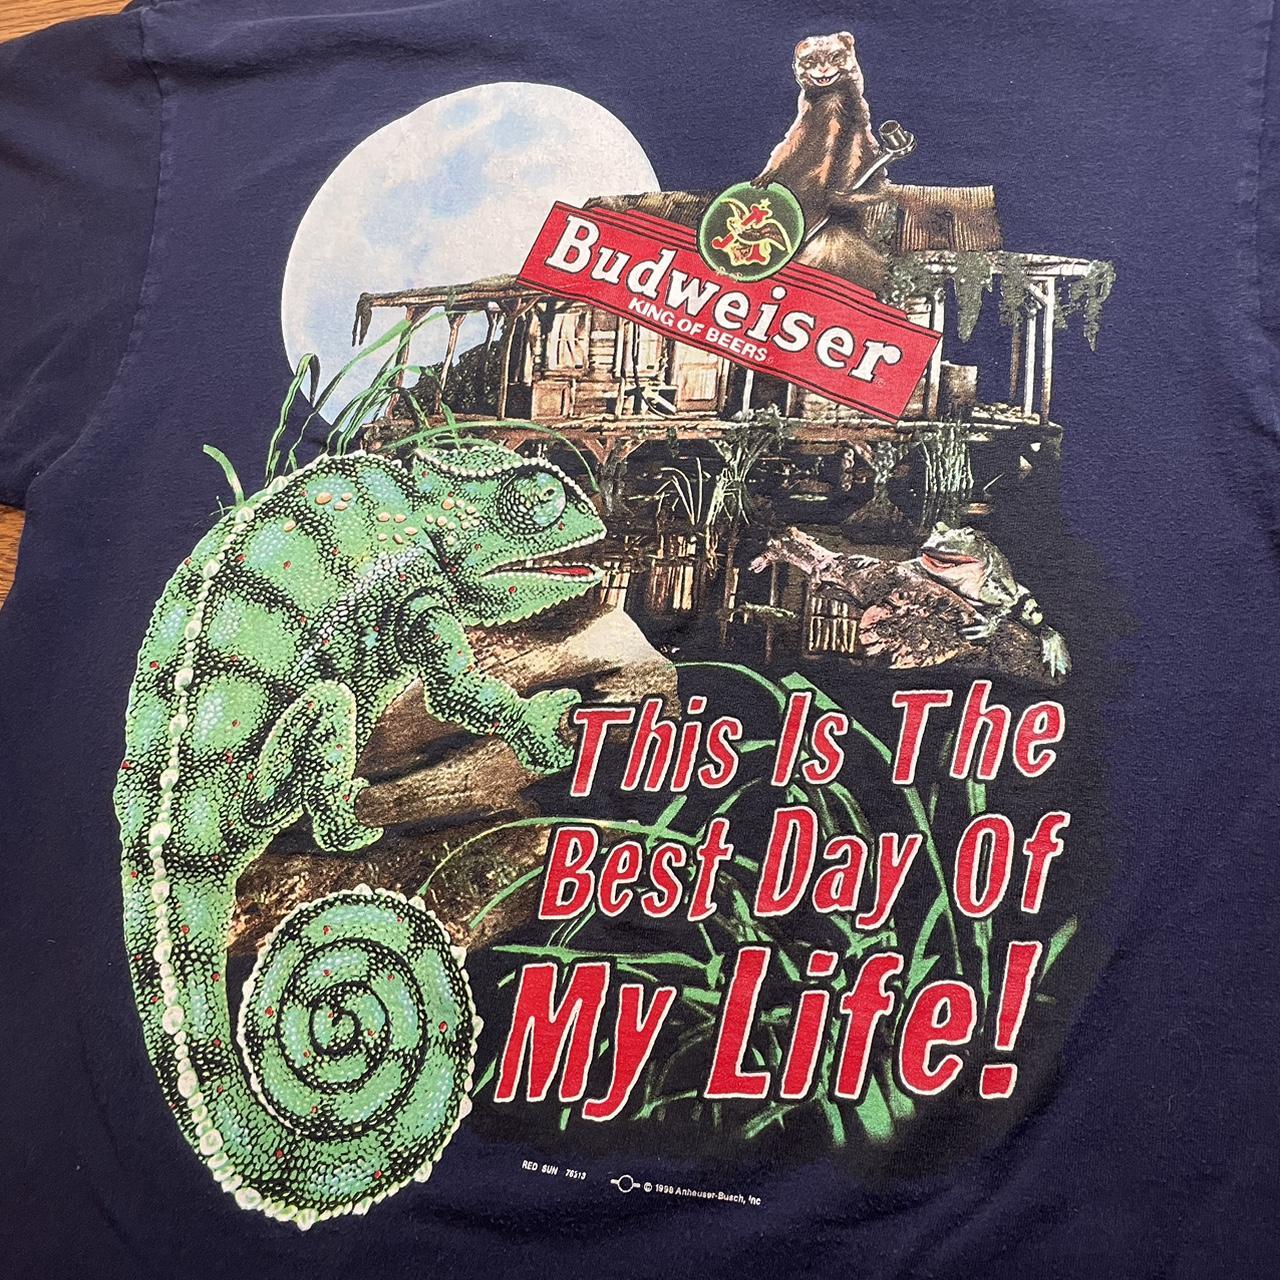 1996 Budweiser “The Best Day of My Life!” T... - Depop